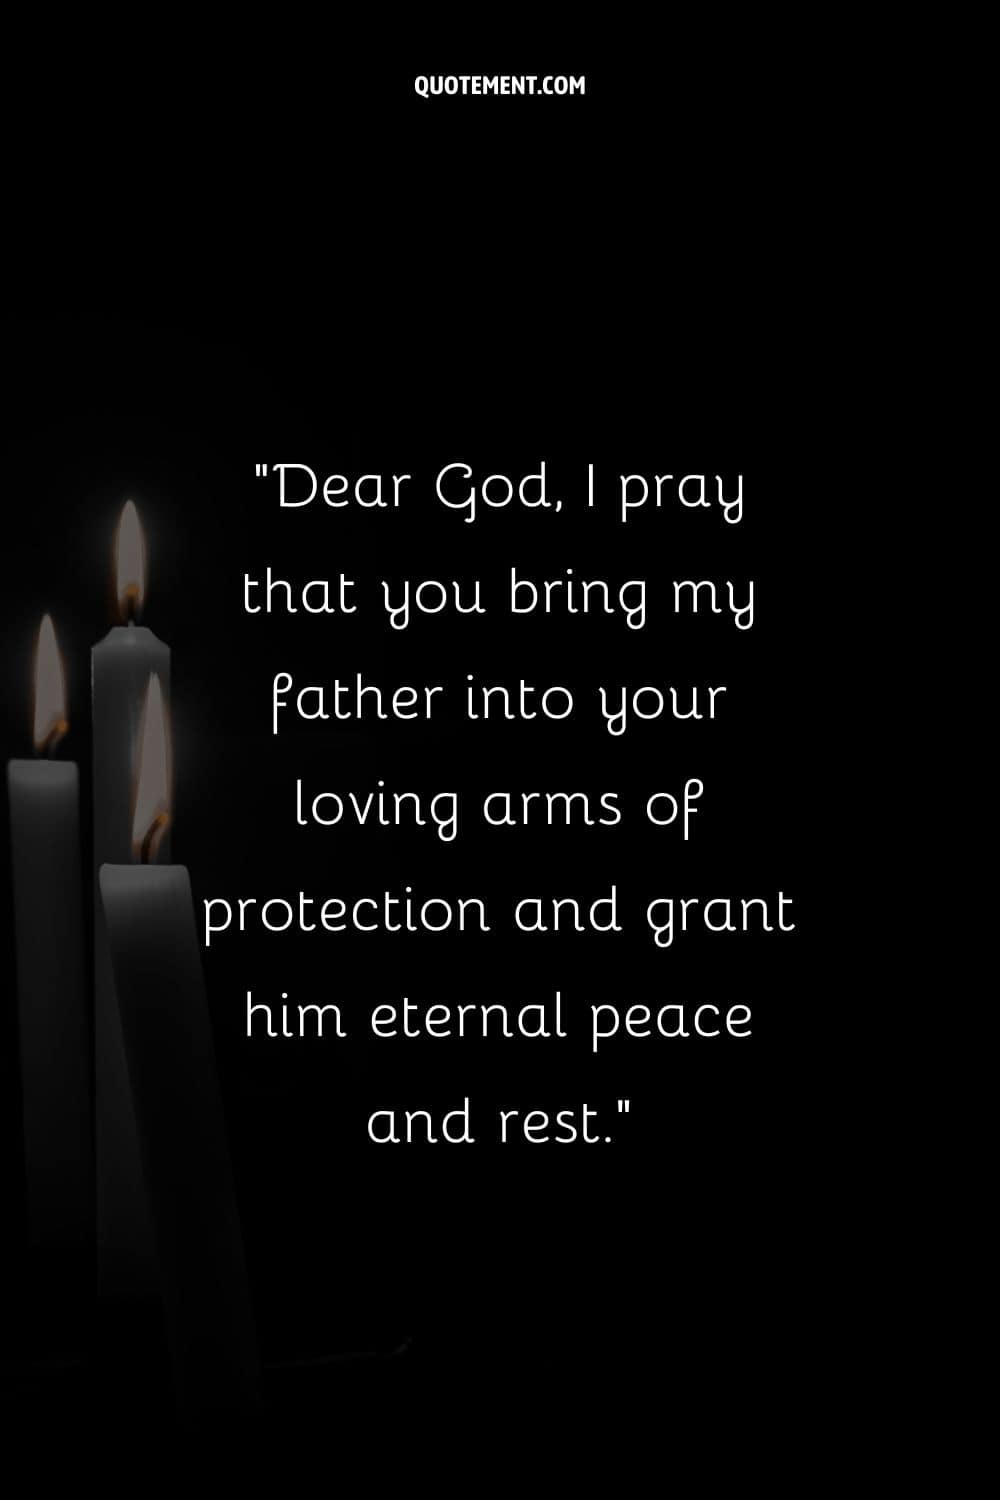 Prayer quote for the lose of a father.